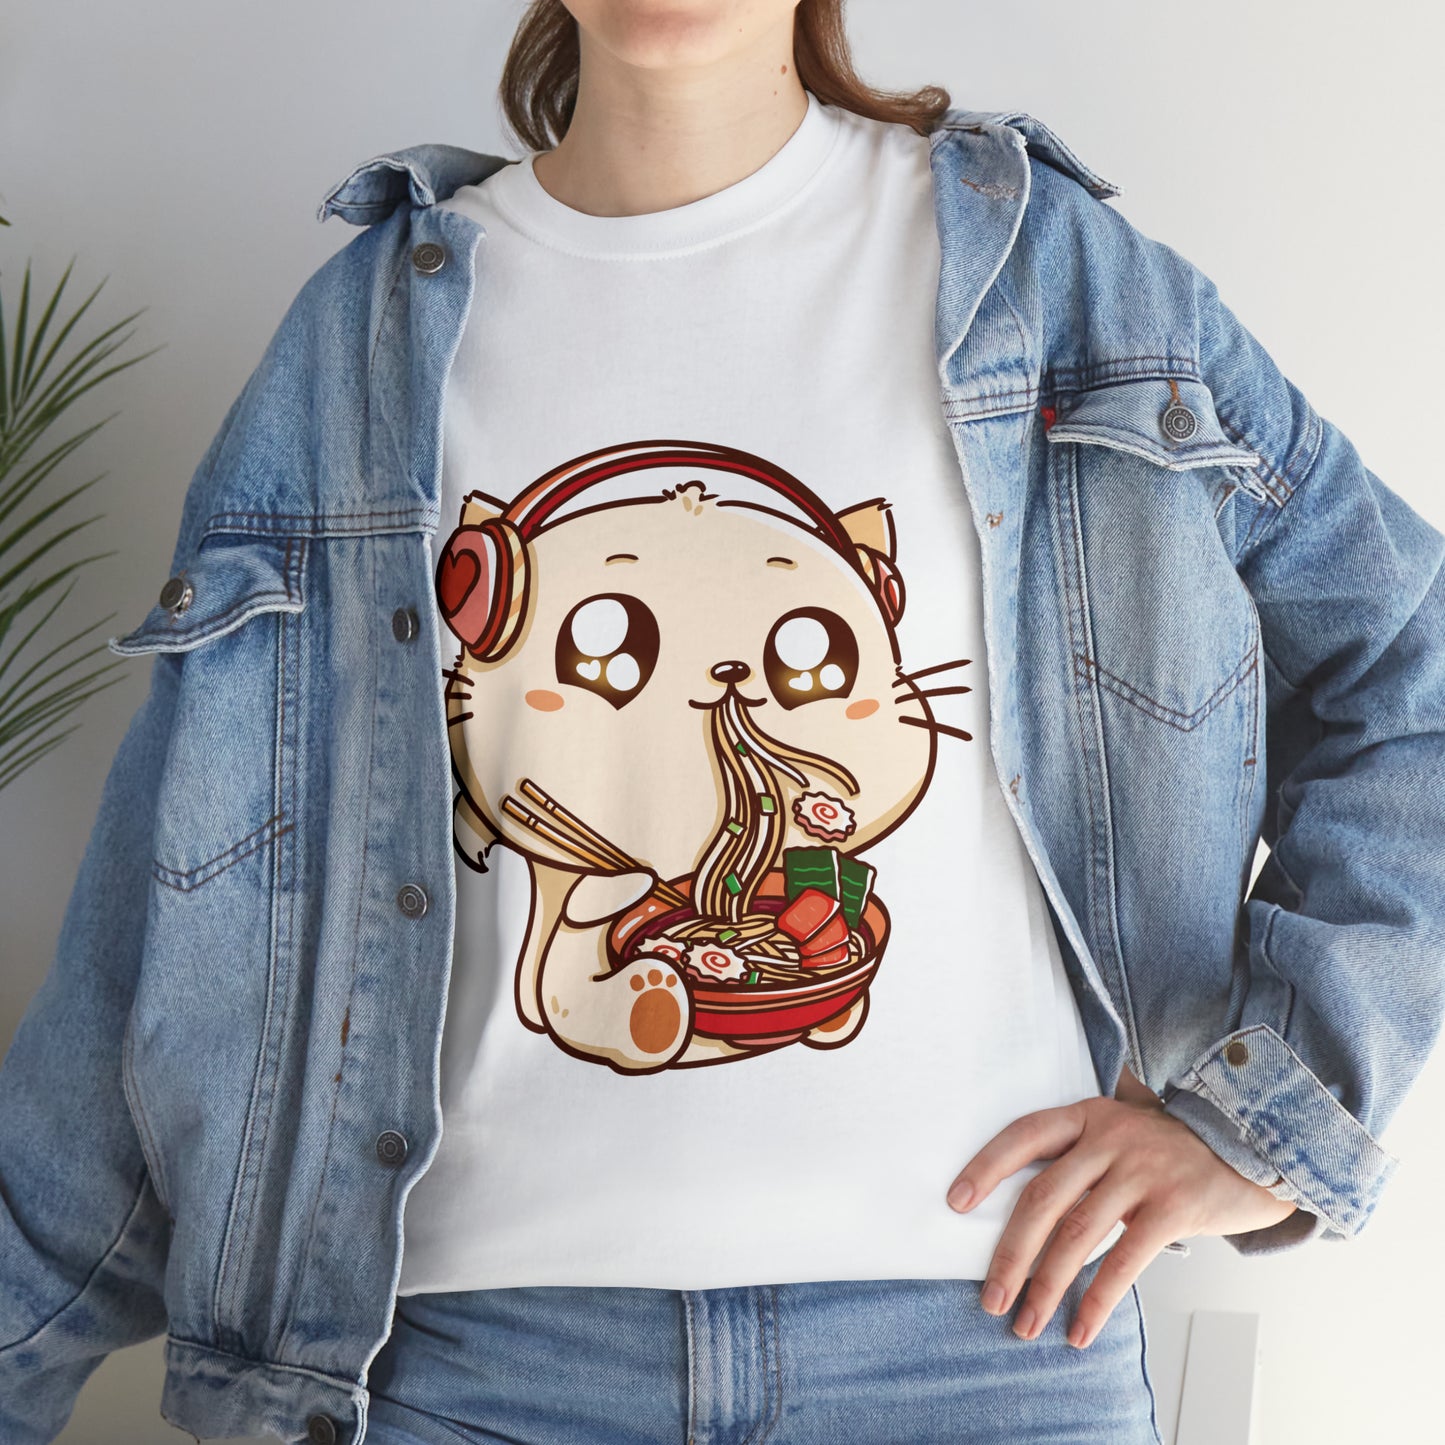 This Might Be The Cutest Cat On A Tshirt You Have Ever Seen! Bonus: It Eats Ramen!